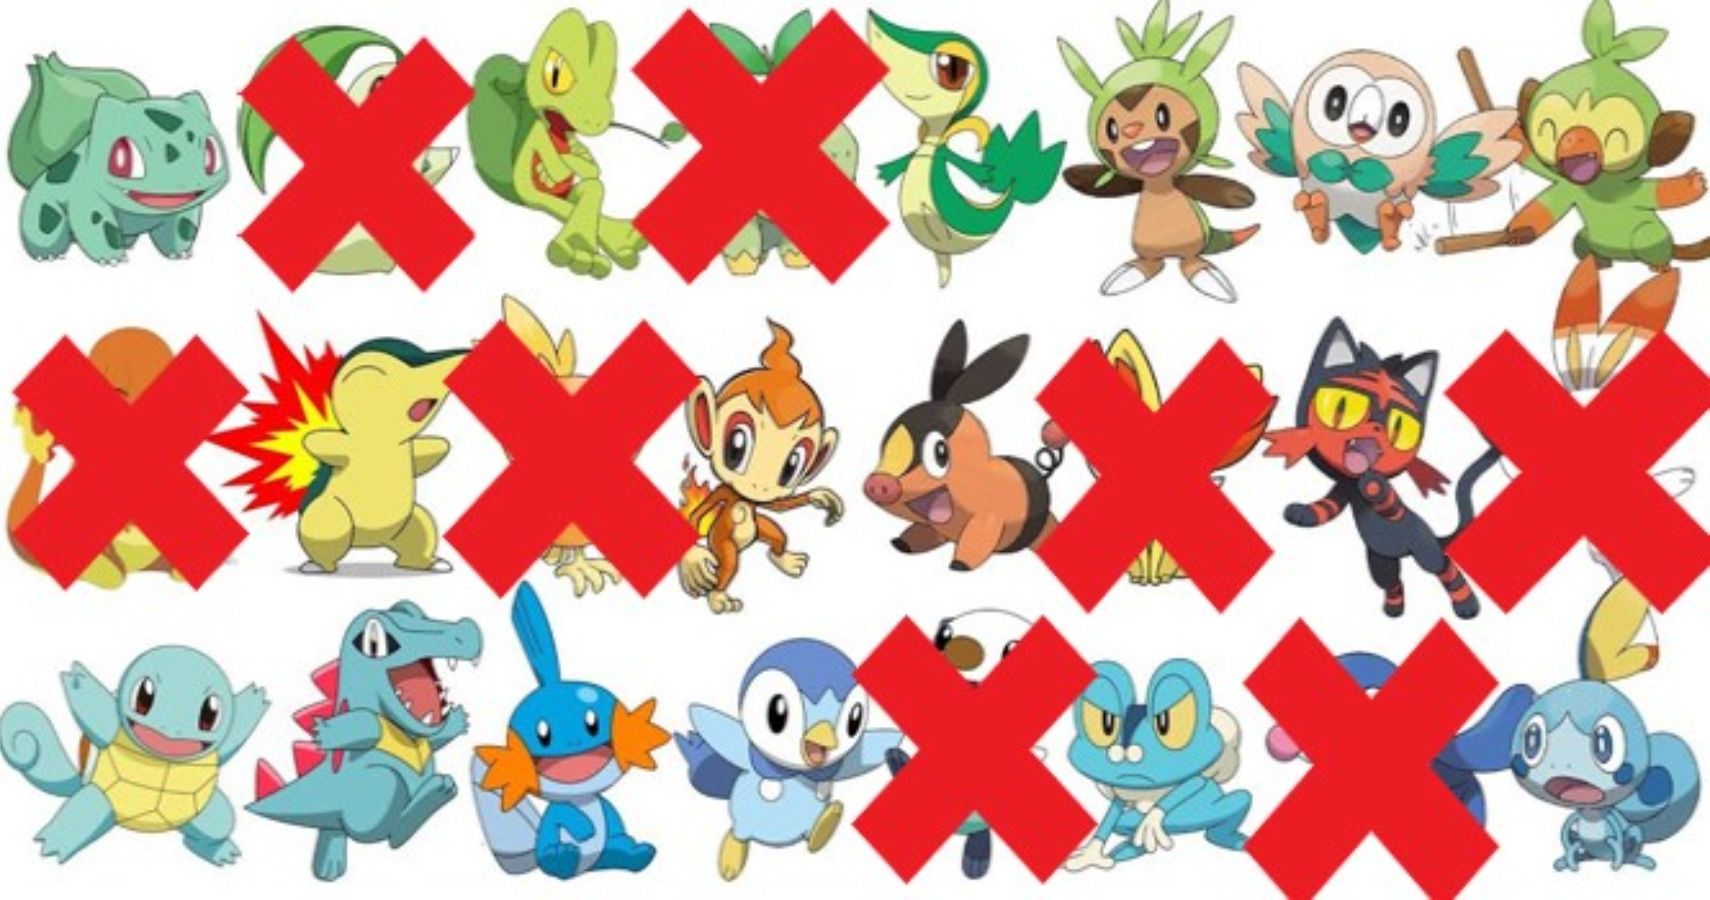 Sorry To All Of The Unpicked Pokemon Starters Out There